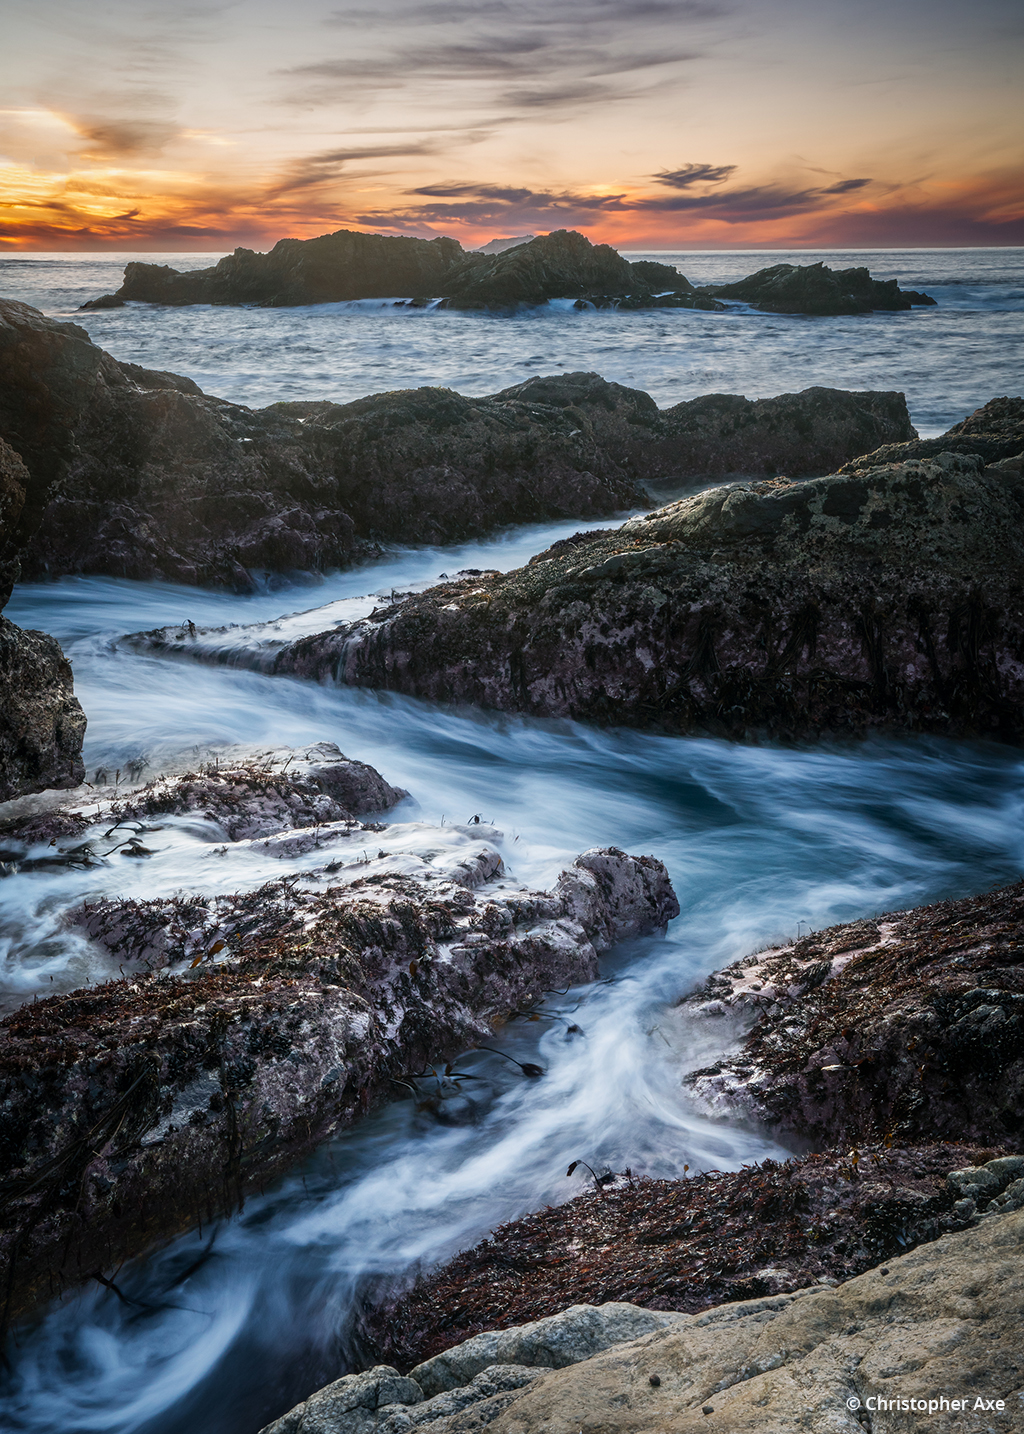 Today’s Photo Of The Day is “Zig Zag” by Christopher Axe. Location: Garrapata State Park, Big Sur, California.